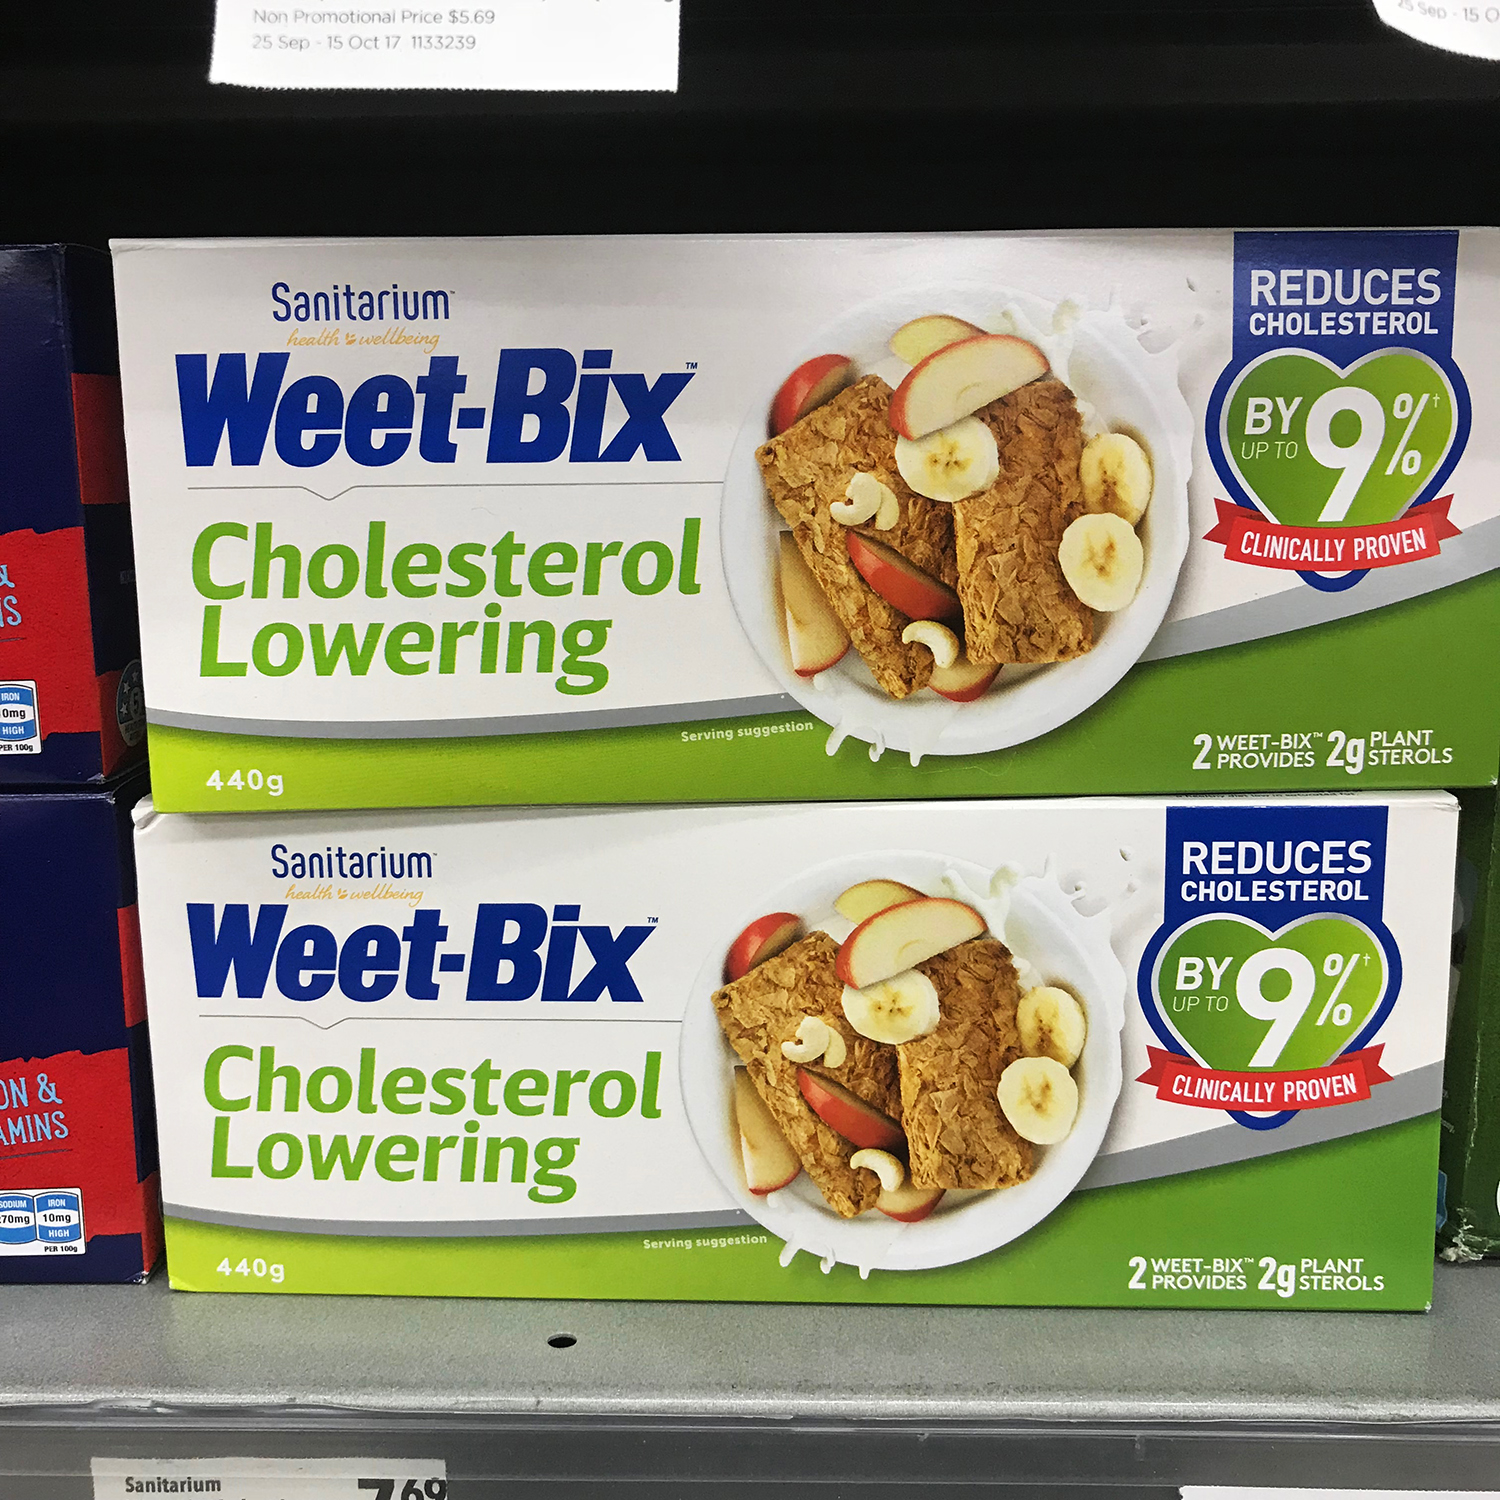 Another anti-cholesterol option